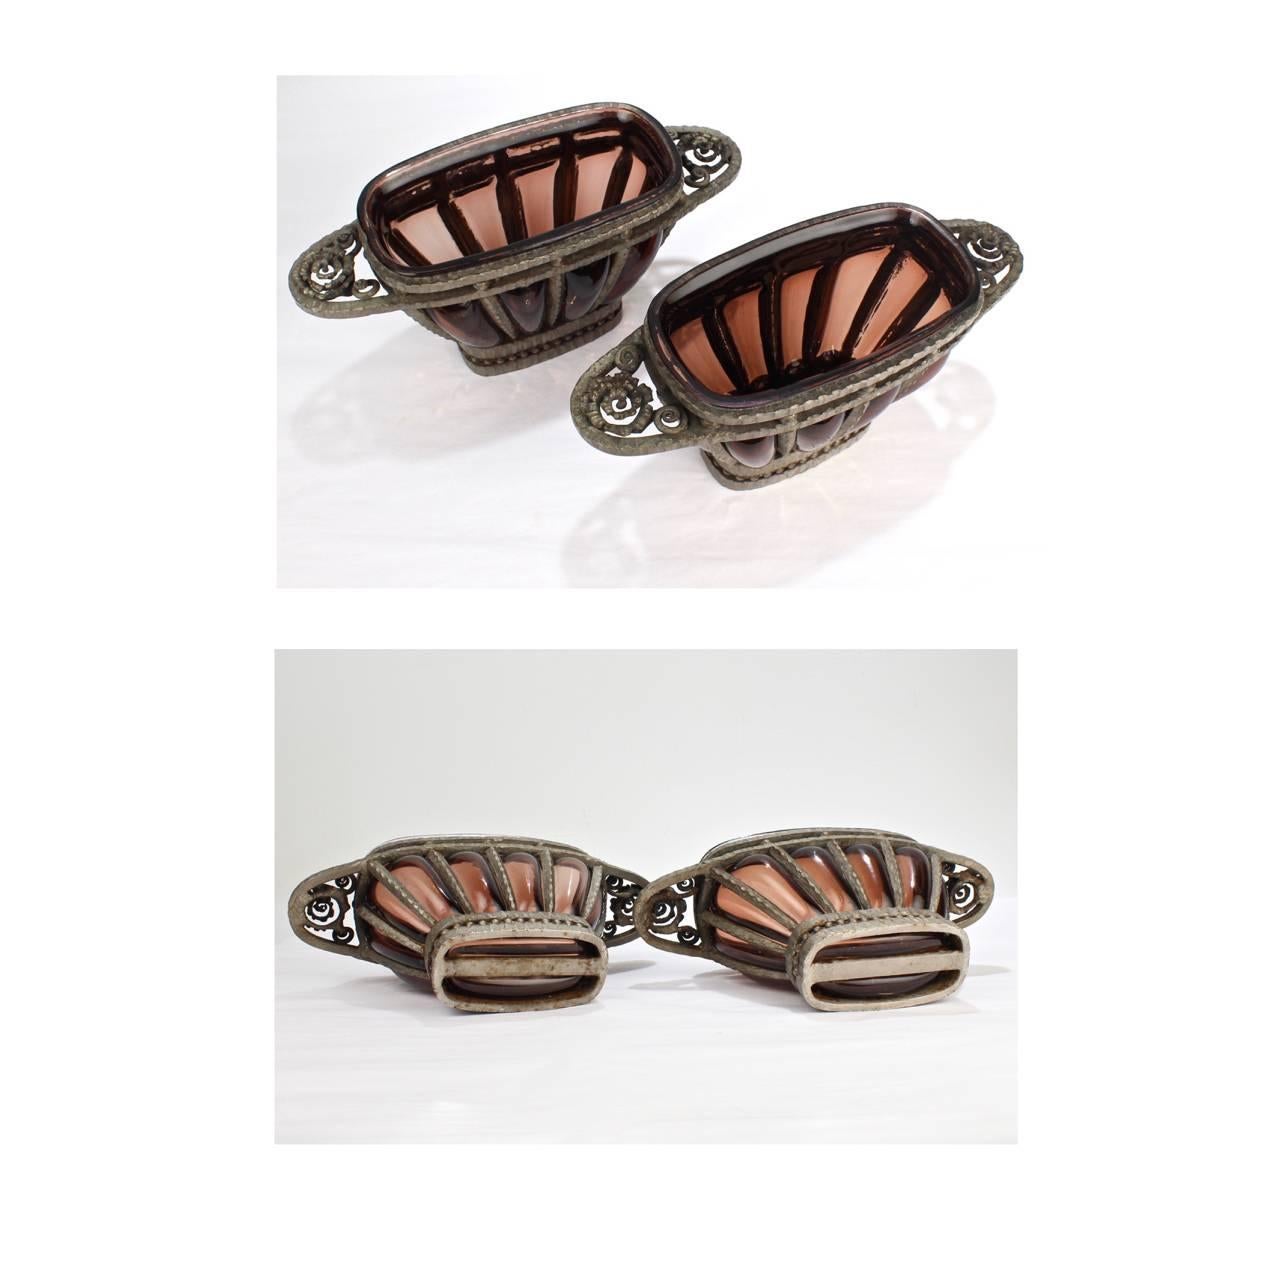 Pair of French Art Deco Wrought Iron and Glass Cachepots by Muller Freres, 1930s For Sale 3